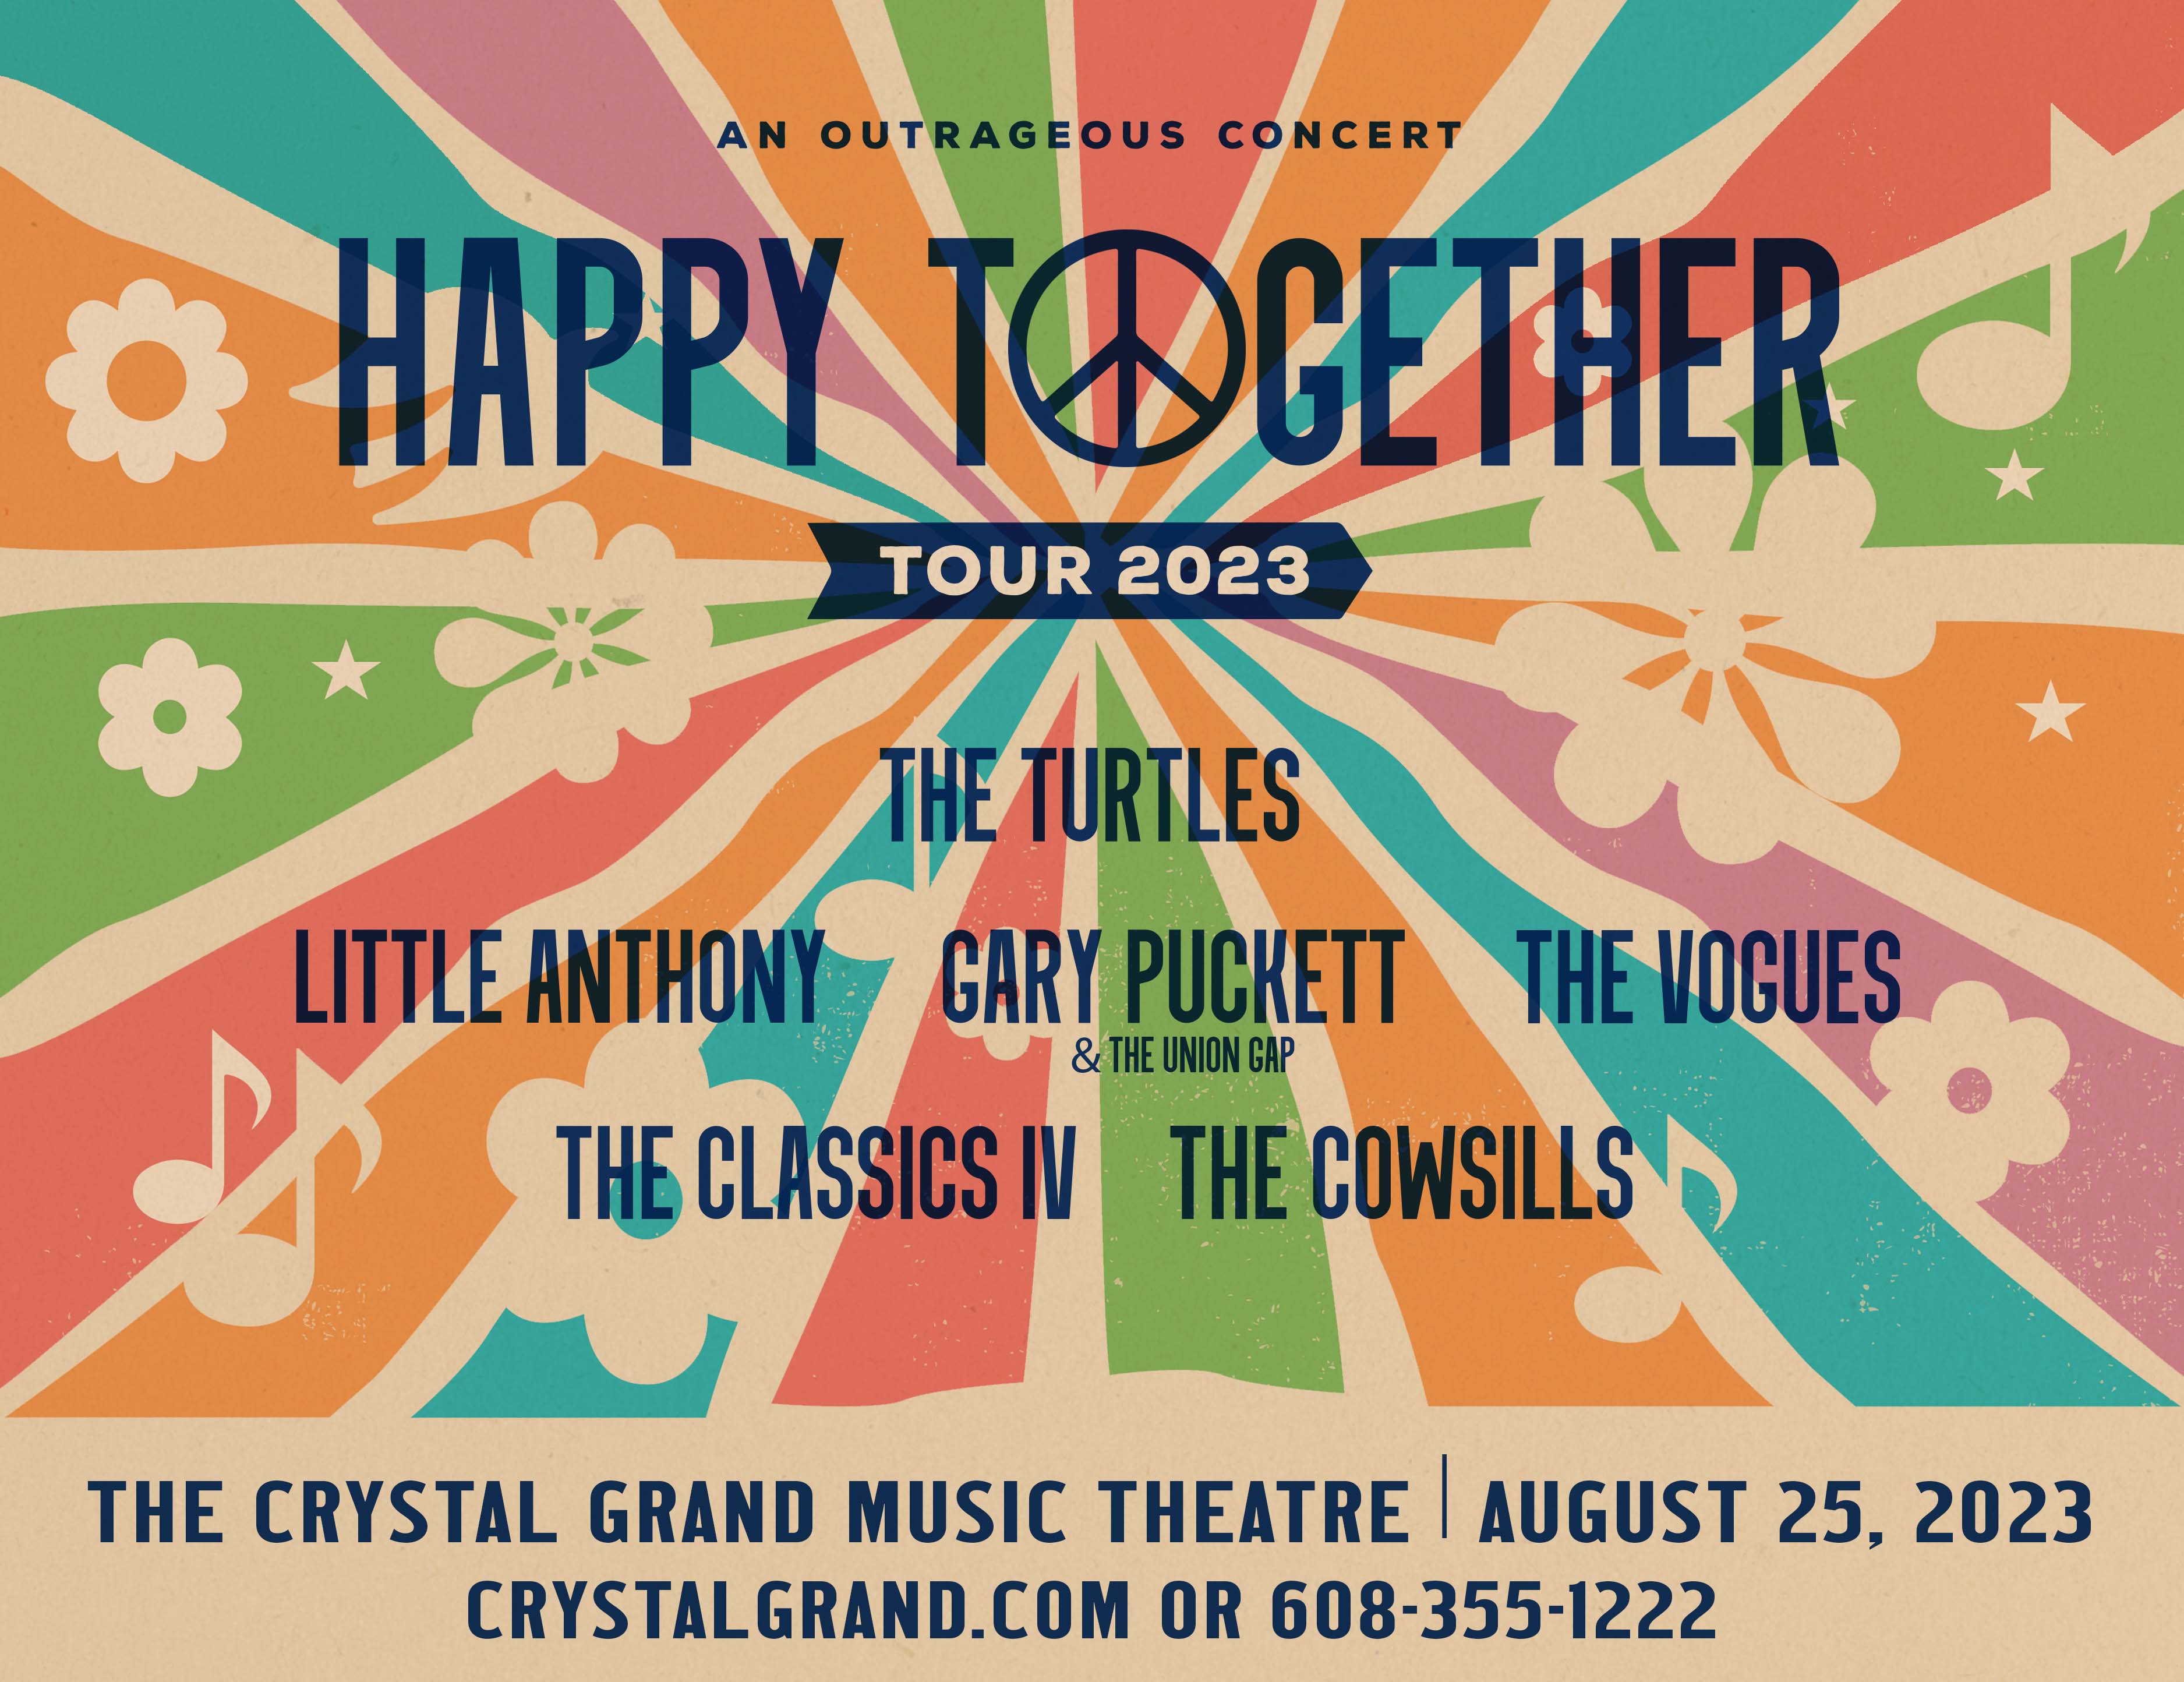 Happy Together Tour Tickets Wisconsin Dells, WI Crystal Grand Music